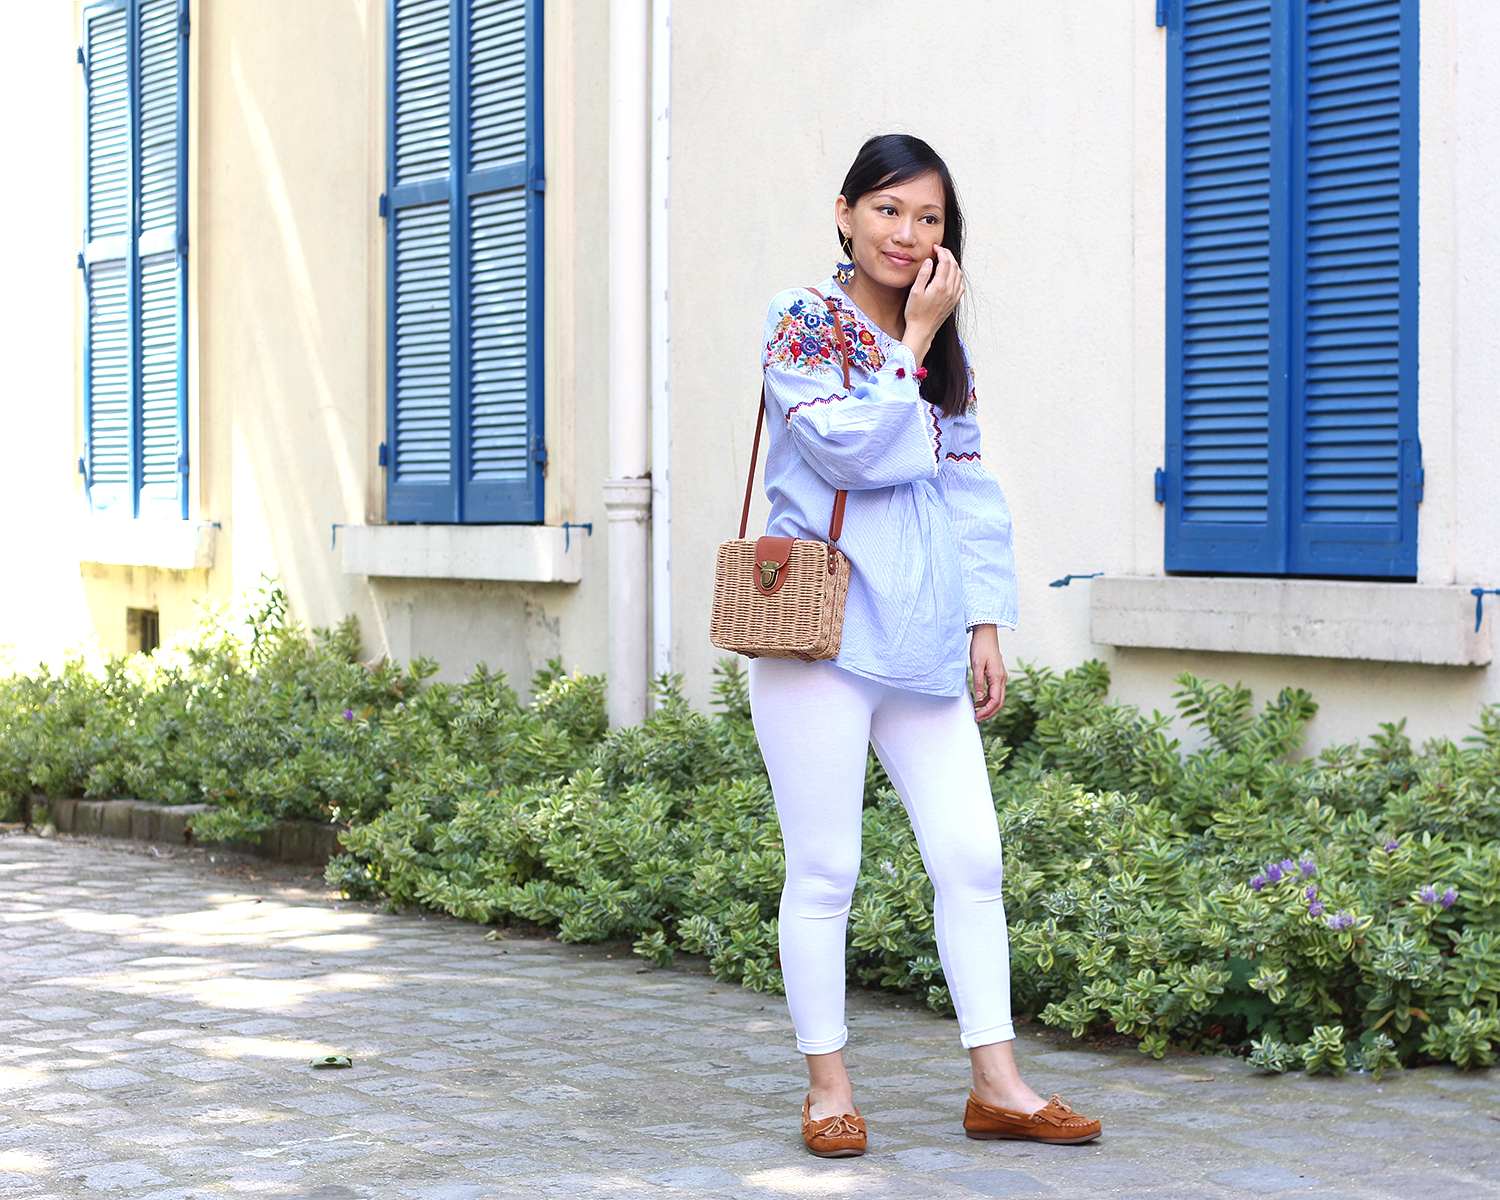 petite and so what - tenue ethnique - blouse brodee fleurs Zara 6